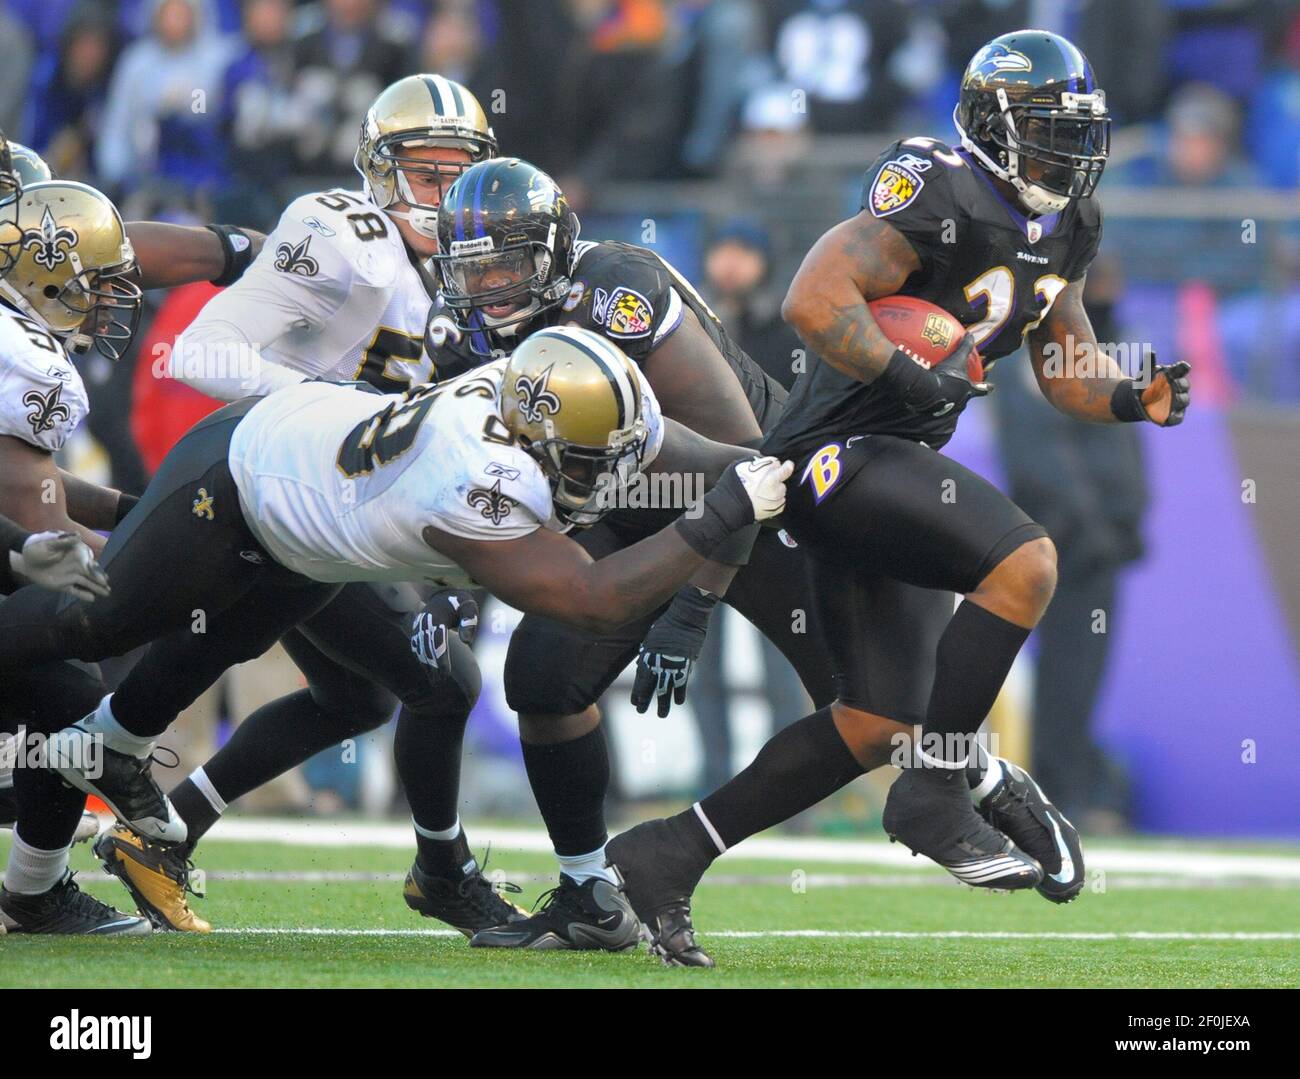 Baltimore Ravens running back Willis McGahee leaves New Orleans Saints defensive tackle Sedrick Ellis with just his shirt tail as he breaks away from the defense for a first down. The Baltimore Ravens defeat the New Orleans Saints 30-24 on Sunday, December 19, 2010, at M&amp;T Bank Stadium in Baltimore, Maryland. (Photo by Doug Kapustin/MCT/Sipa USA) Stock Photo